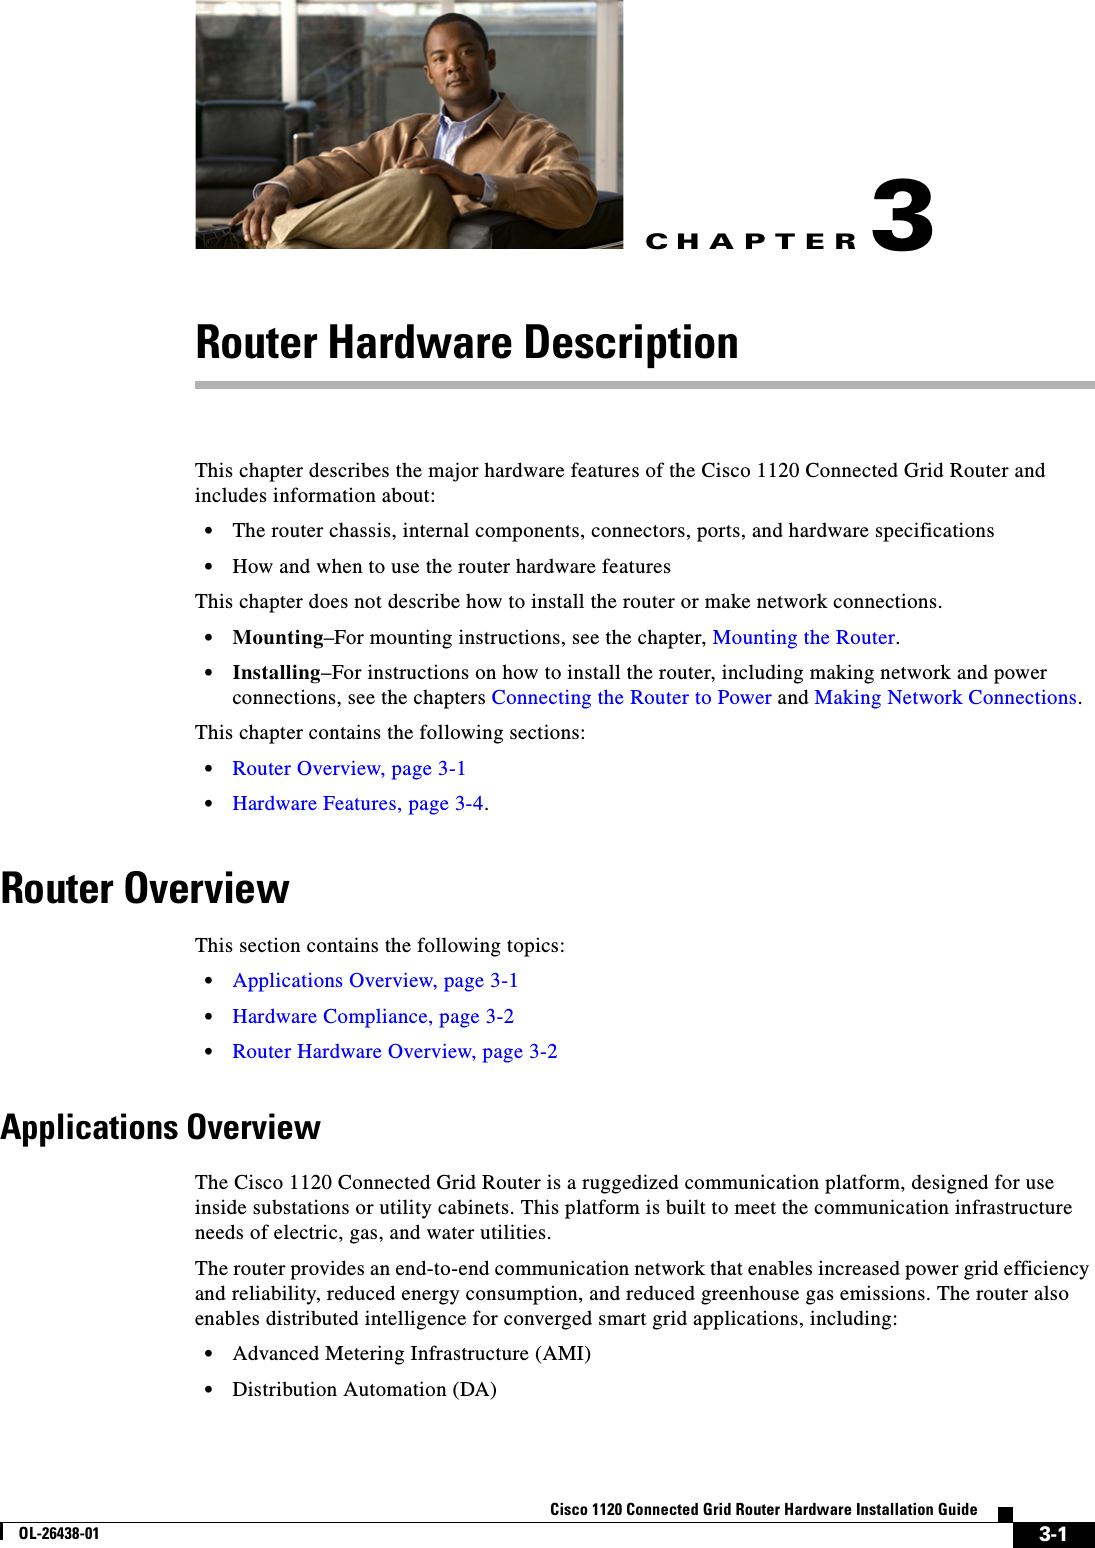 CHAPTER 3-1Cisco 1120 Connected Grid Router Hardware Installation GuideOL-26438-013Router Hardware DescriptionThis chapter describes the major hardware features of the Cisco 1120 Connected Grid Router and includes information about:•The router chassis, internal components, connectors, ports, and hardware specifications•How and when to use the router hardware featuresThis chapter does not describe how to install the router or make network connections.•Mounting–For mounting instructions, see the chapter, Mounting the Router.•Installing–For instructions on how to install the router, including making network and power connections, see the chapters Connecting the Router to Power and Making Network Connections.This chapter contains the following sections:•Router Overview, page 3-1•Hardware Features, page 3-4.Router OverviewThis section contains the following topics:•Applications Overview, page 3-1•Hardware Compliance, page 3-2•Router Hardware Overview, page 3-2Applications OverviewThe Cisco 1120 Connected Grid Router is a ruggedized communication platform, designed for use inside substations or utility cabinets. This platform is built to meet the communication infrastructure needs of electric, gas, and water utilities.The router provides an end-to-end communication network that enables increased power grid efficiency and reliability, reduced energy consumption, and reduced greenhouse gas emissions. The router also enables distributed intelligence for converged smart grid applications, including:•Advanced Metering Infrastructure (AMI)•Distribution Automation (DA)